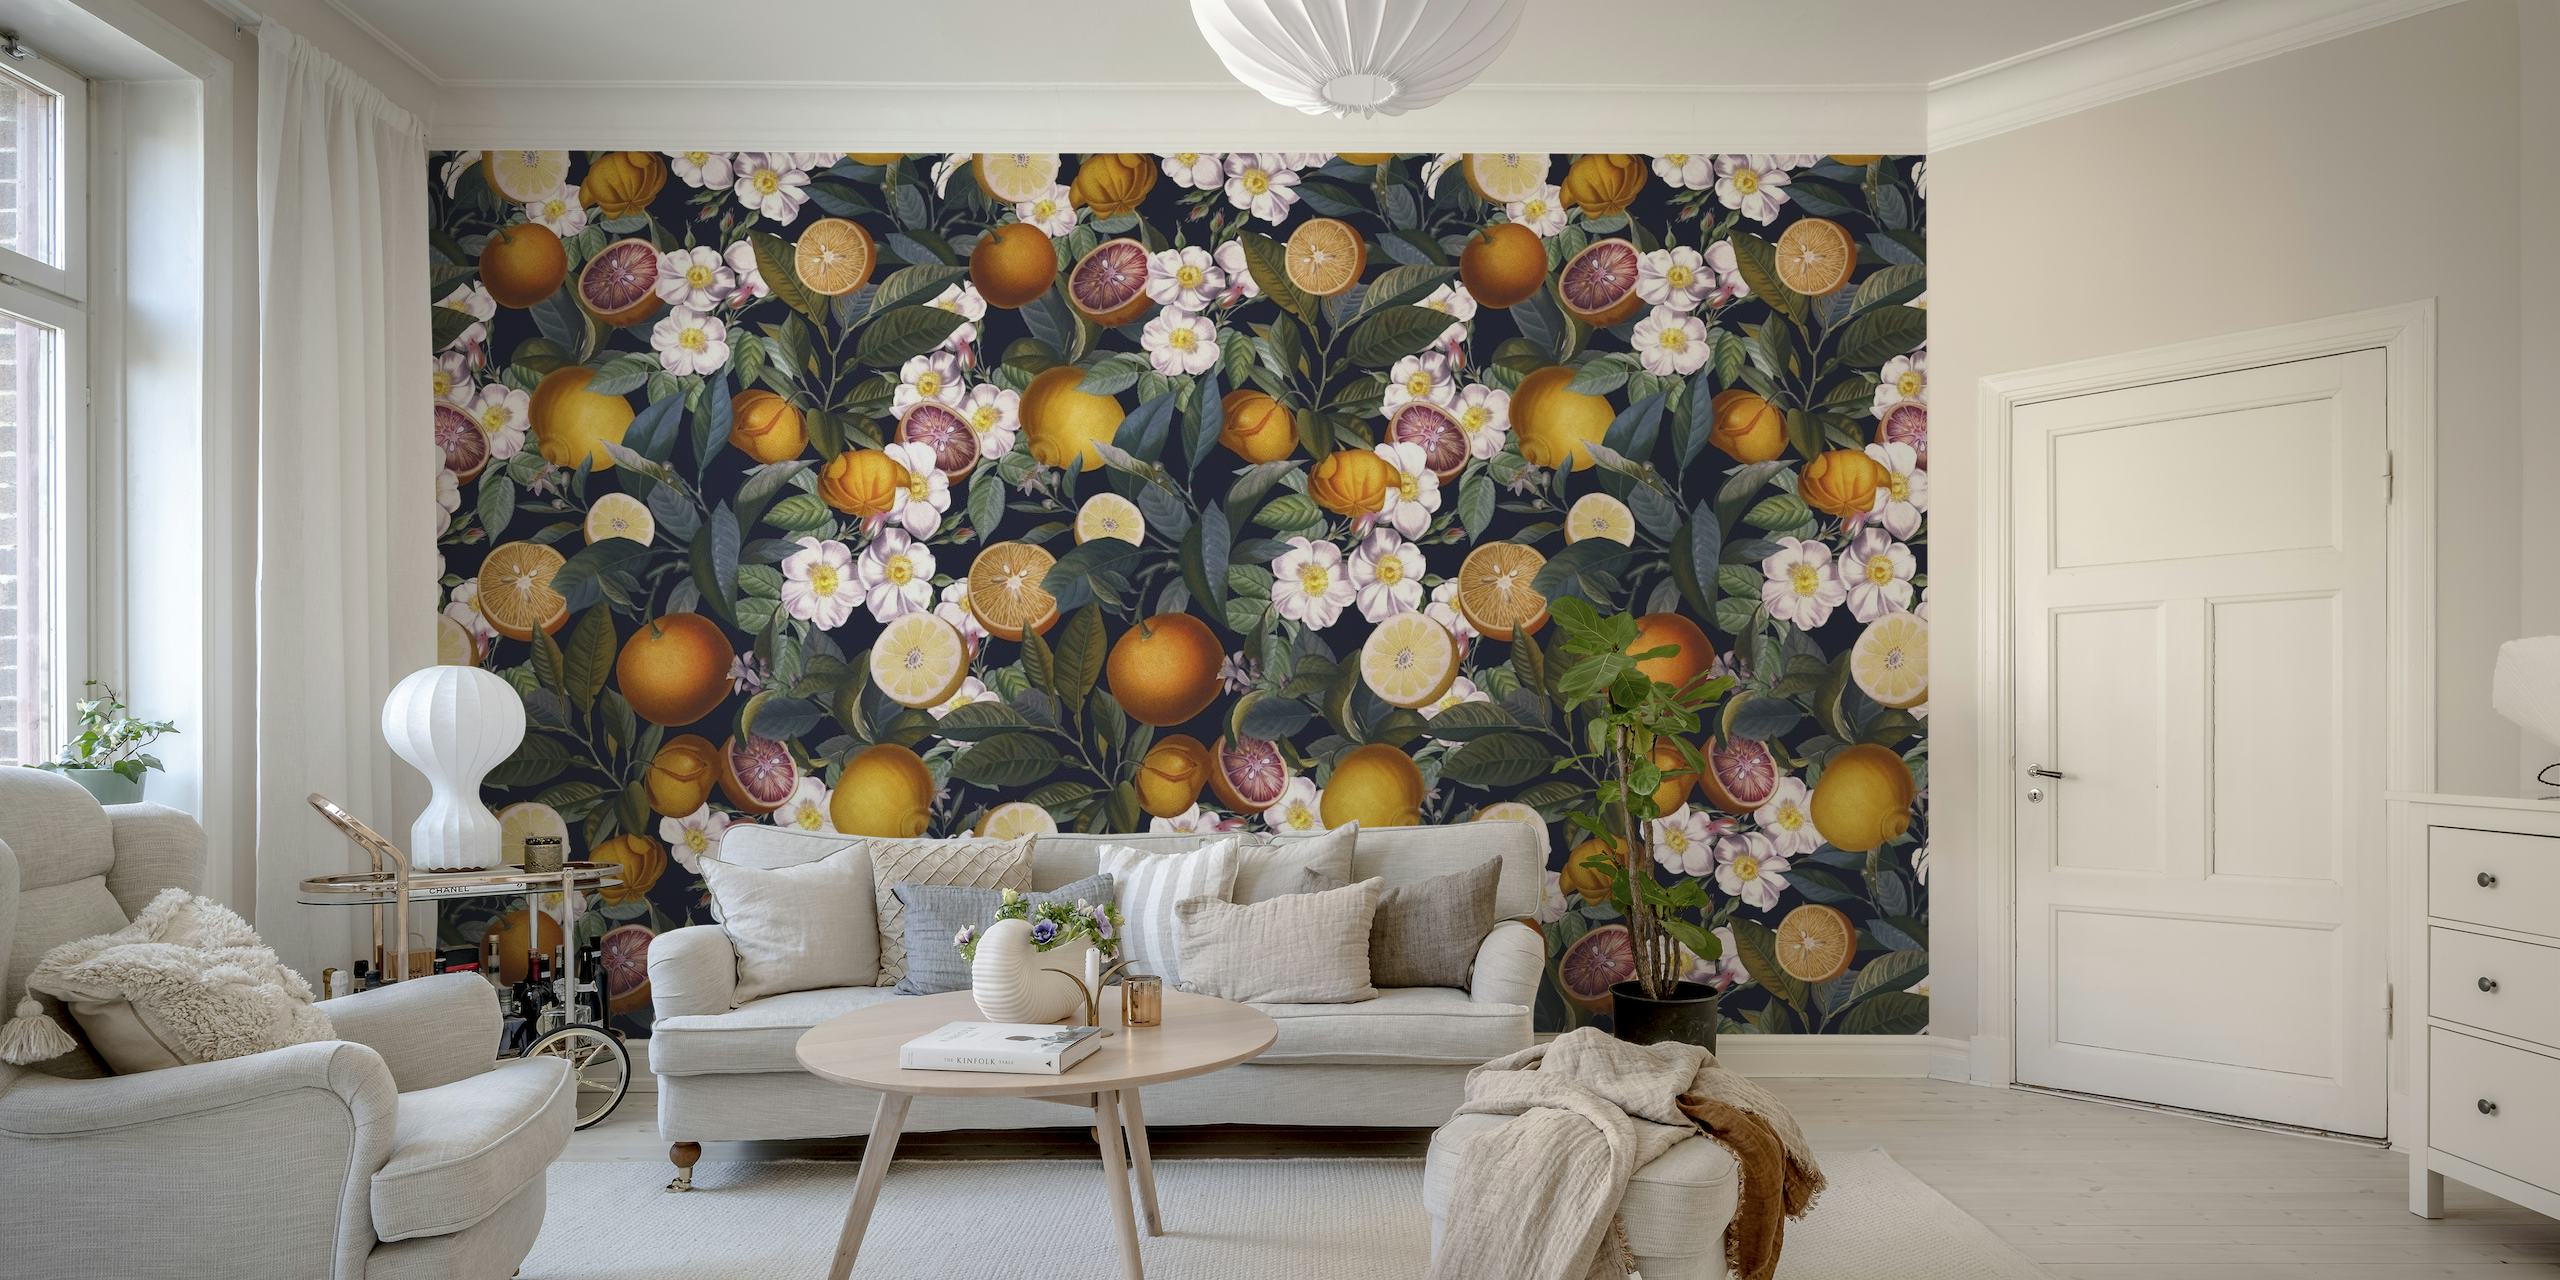 A wall mural named Juicy Lemons - Night showcasing a pattern of ripe lemons and flowers on a dark background